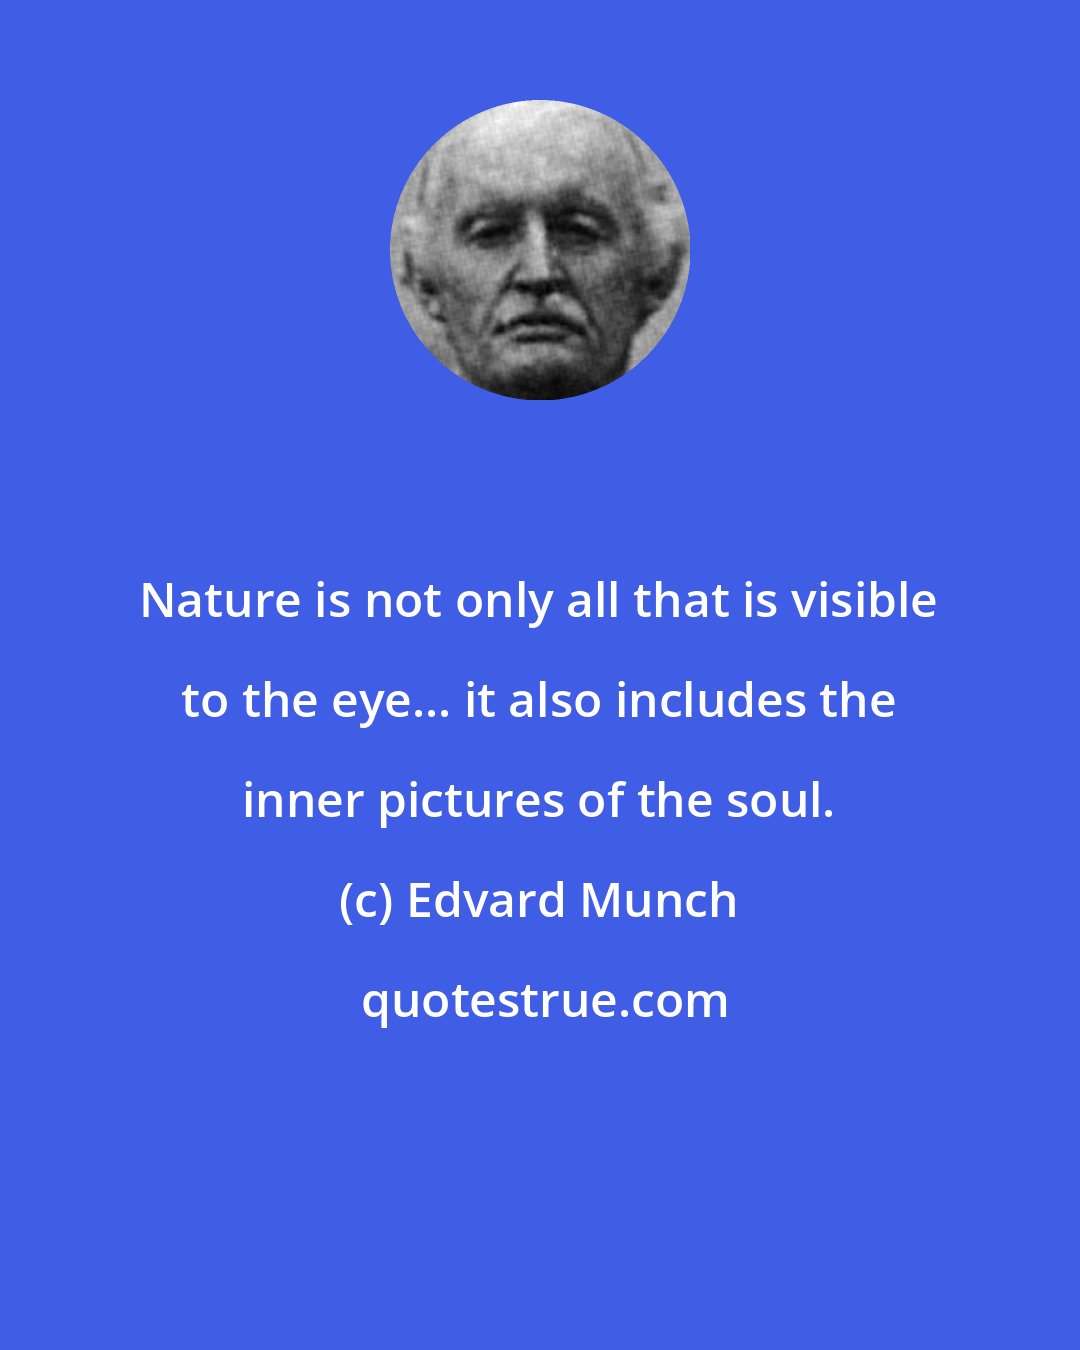 Edvard Munch: Nature is not only all that is visible to the eye... it also includes the inner pictures of the soul.